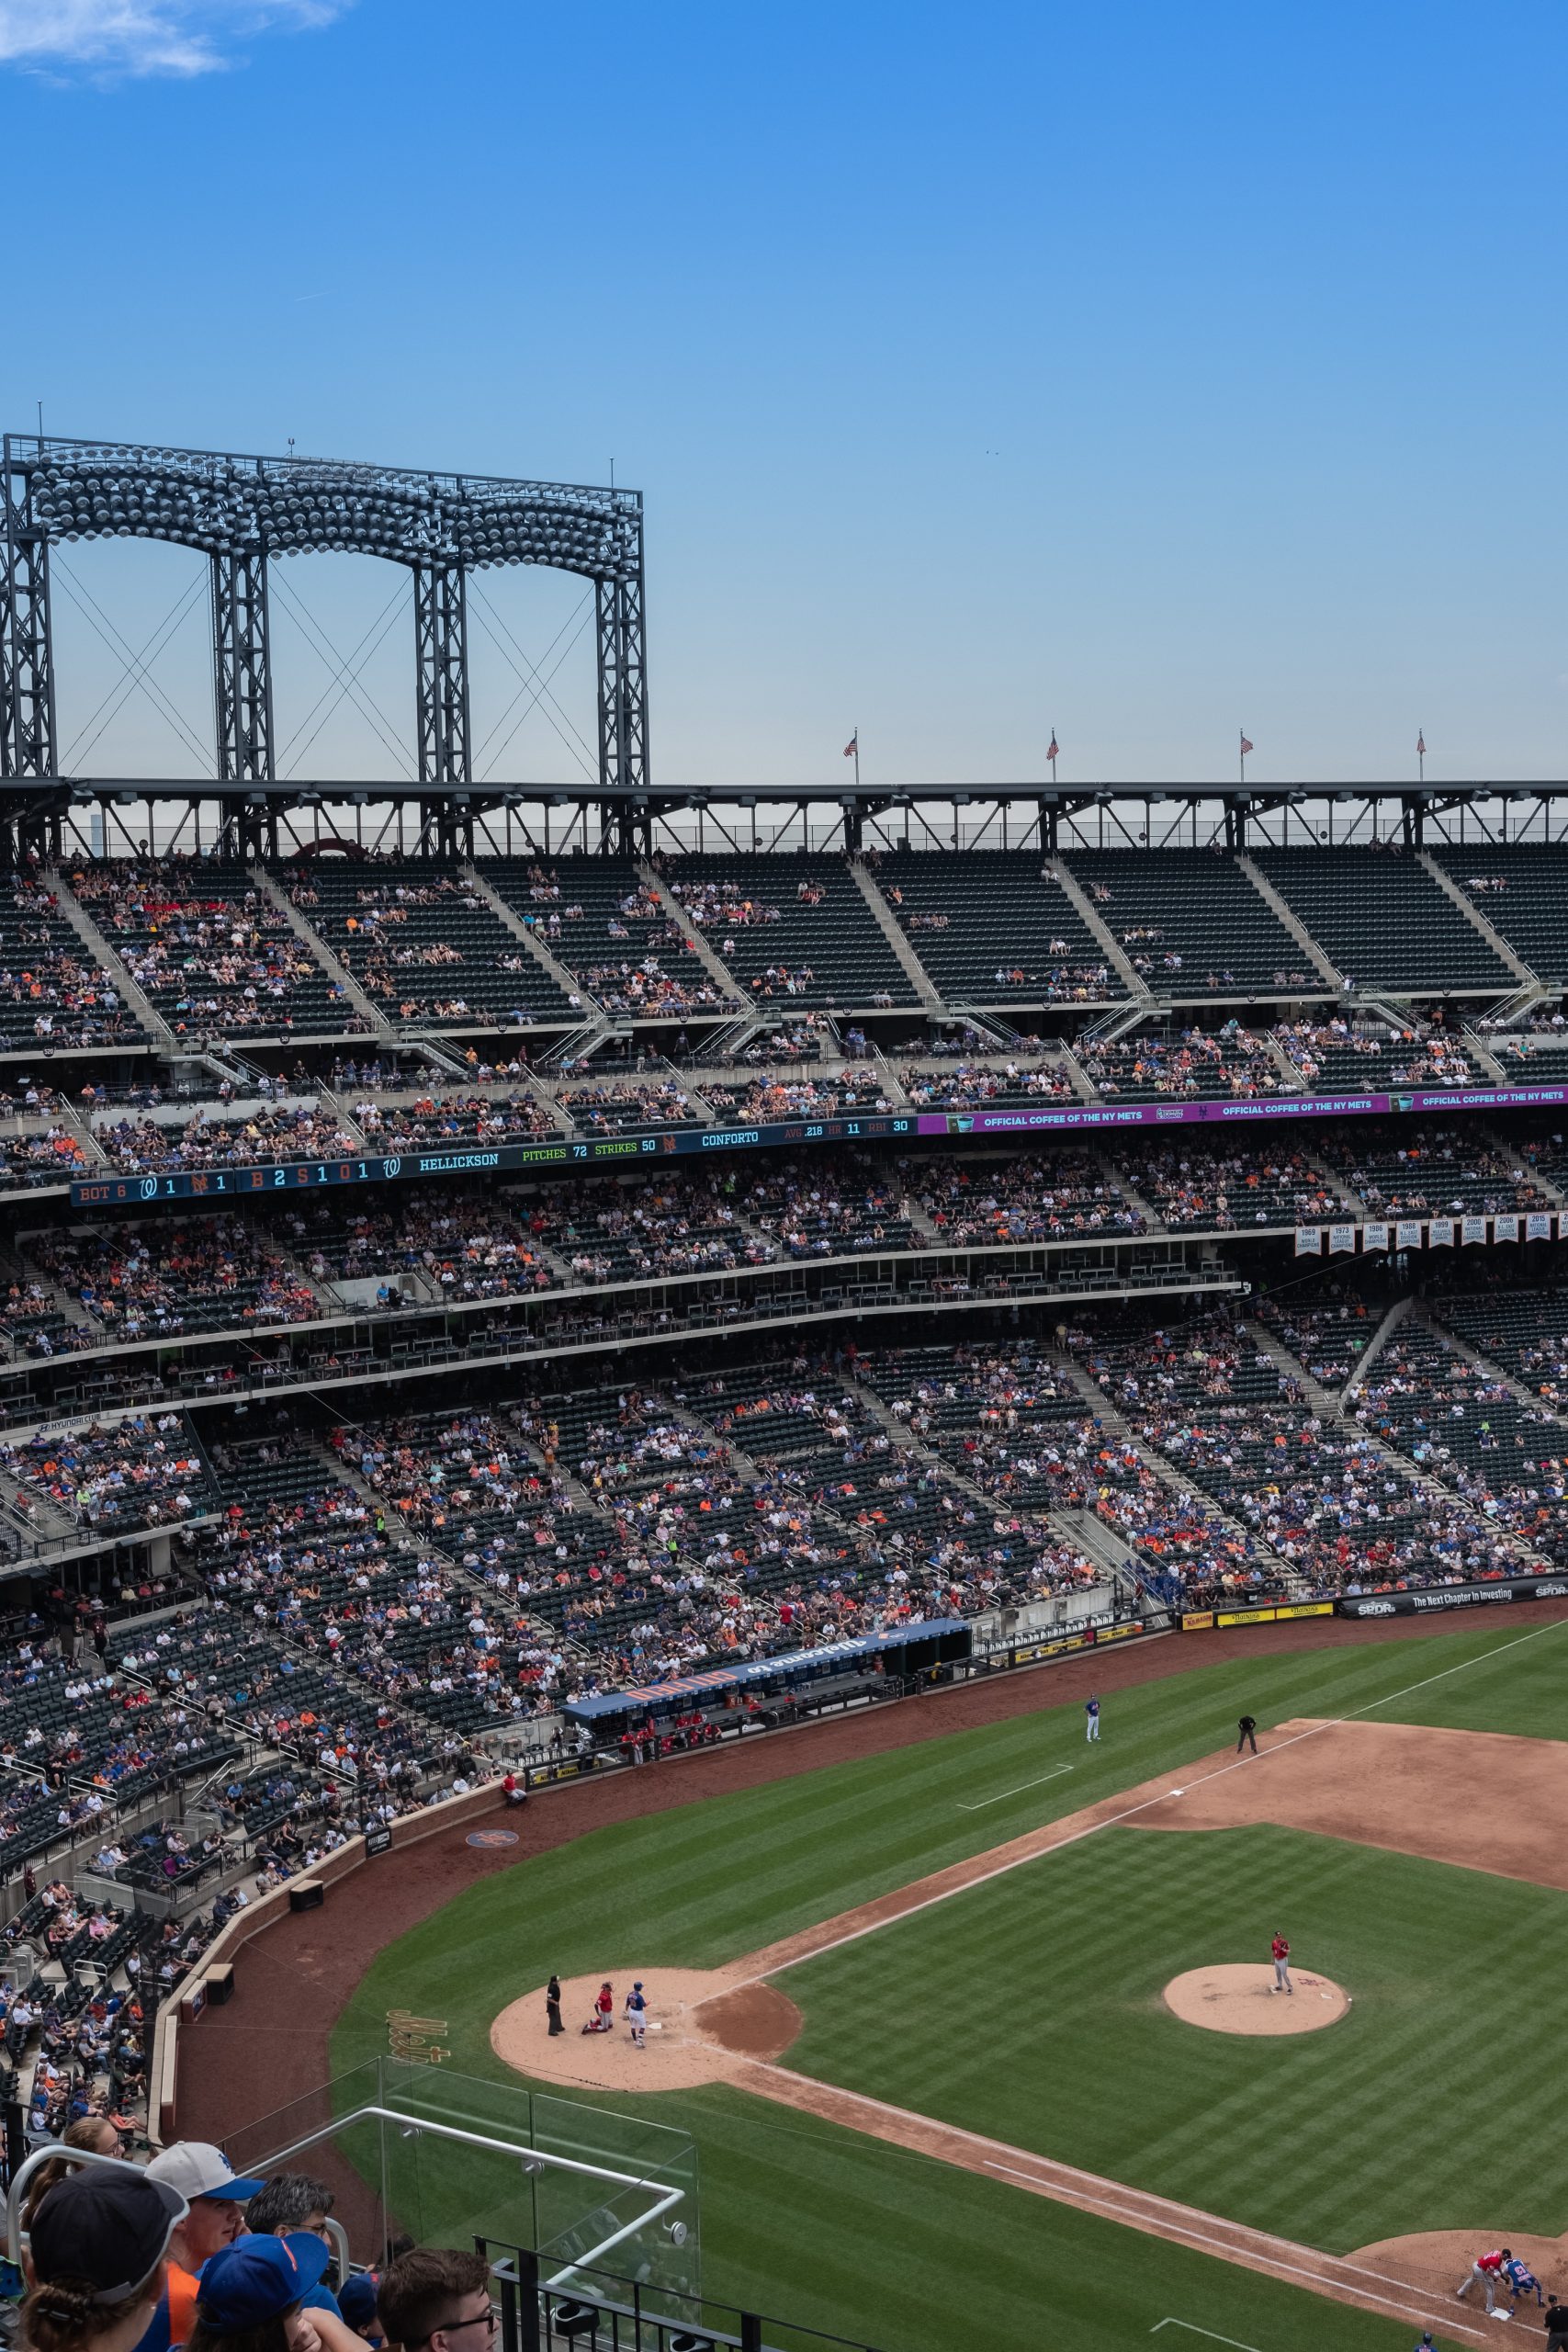 A photograph of fans in the Citi Field Stadium, with part of the baseball diamond in the foreground.